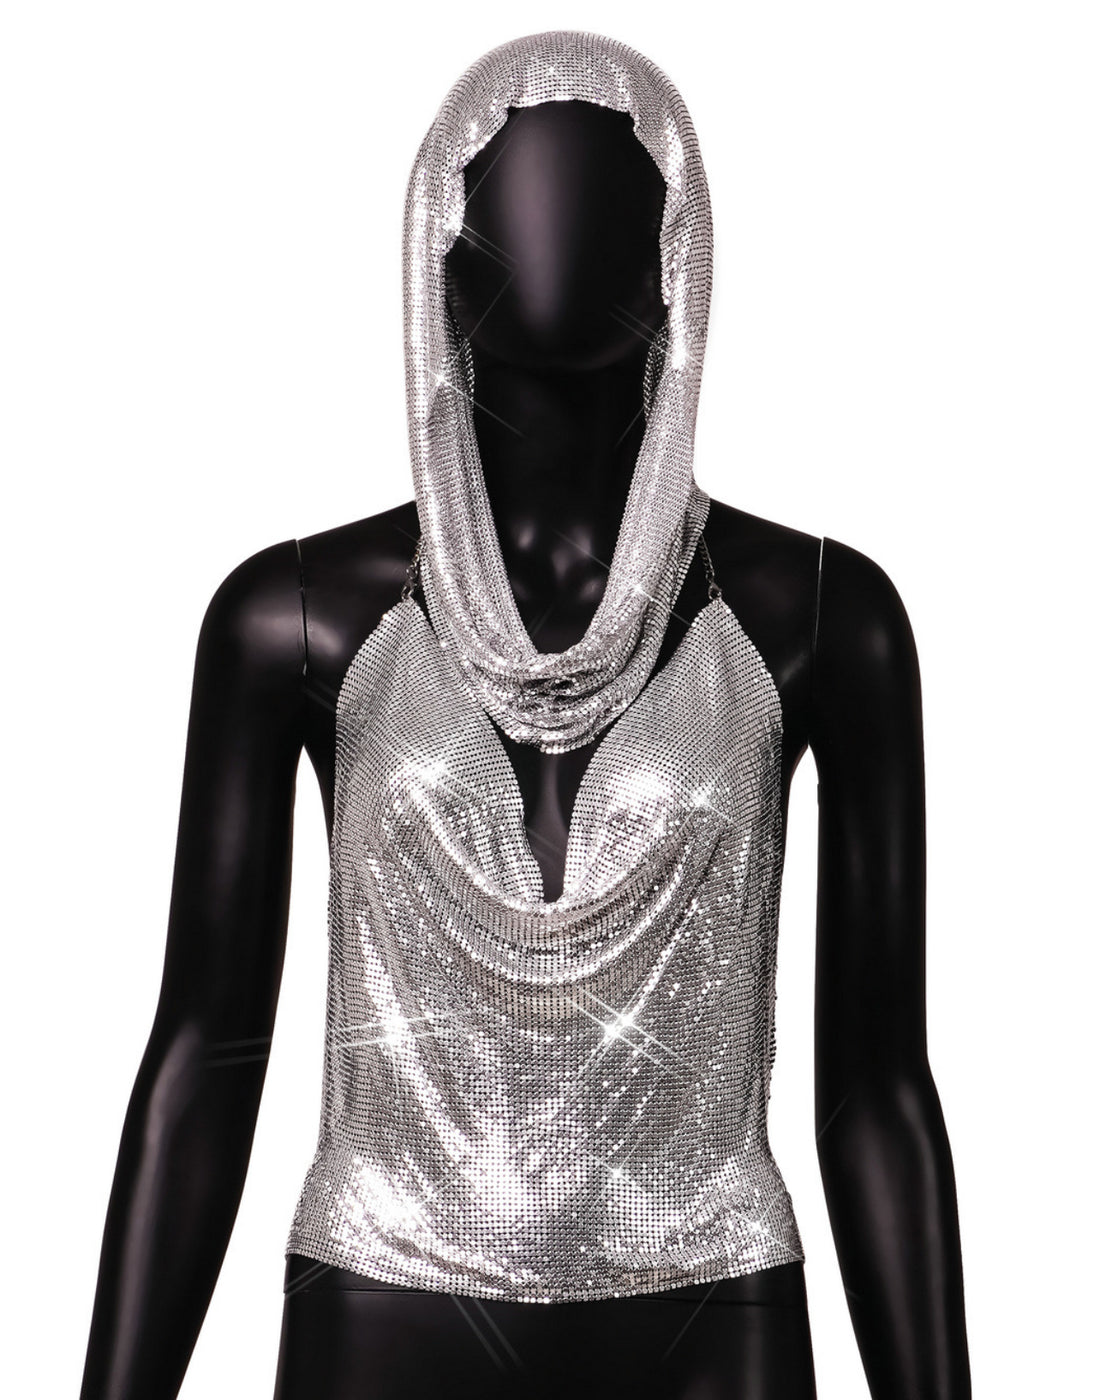 Shimmer Nights Hooded Top ONLINE ONLY - Beauty Junkee Collection